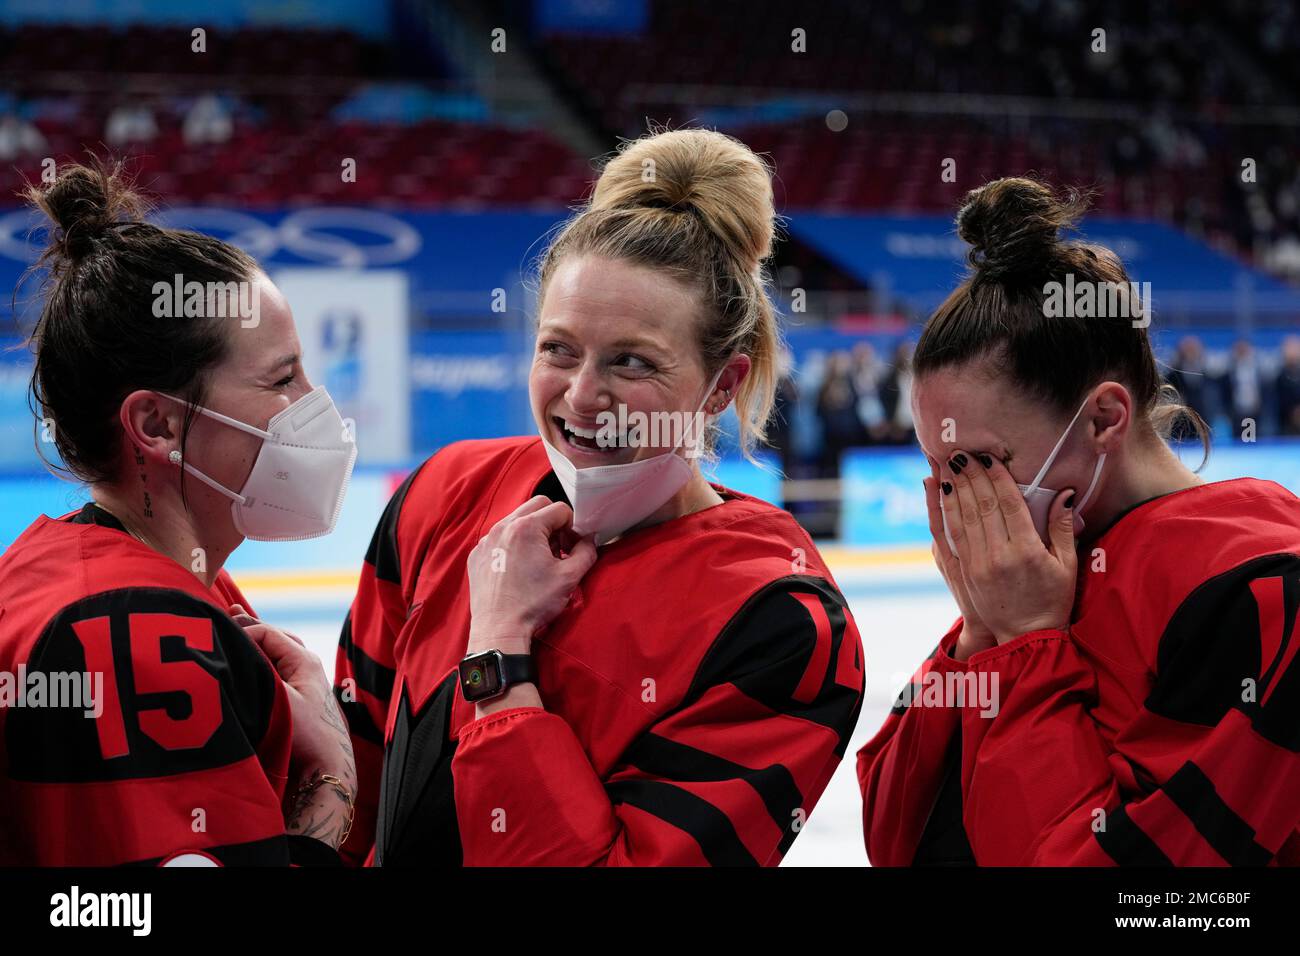 Canada's Melodie Daoust, from left, Renata Fast and Canada's Jill